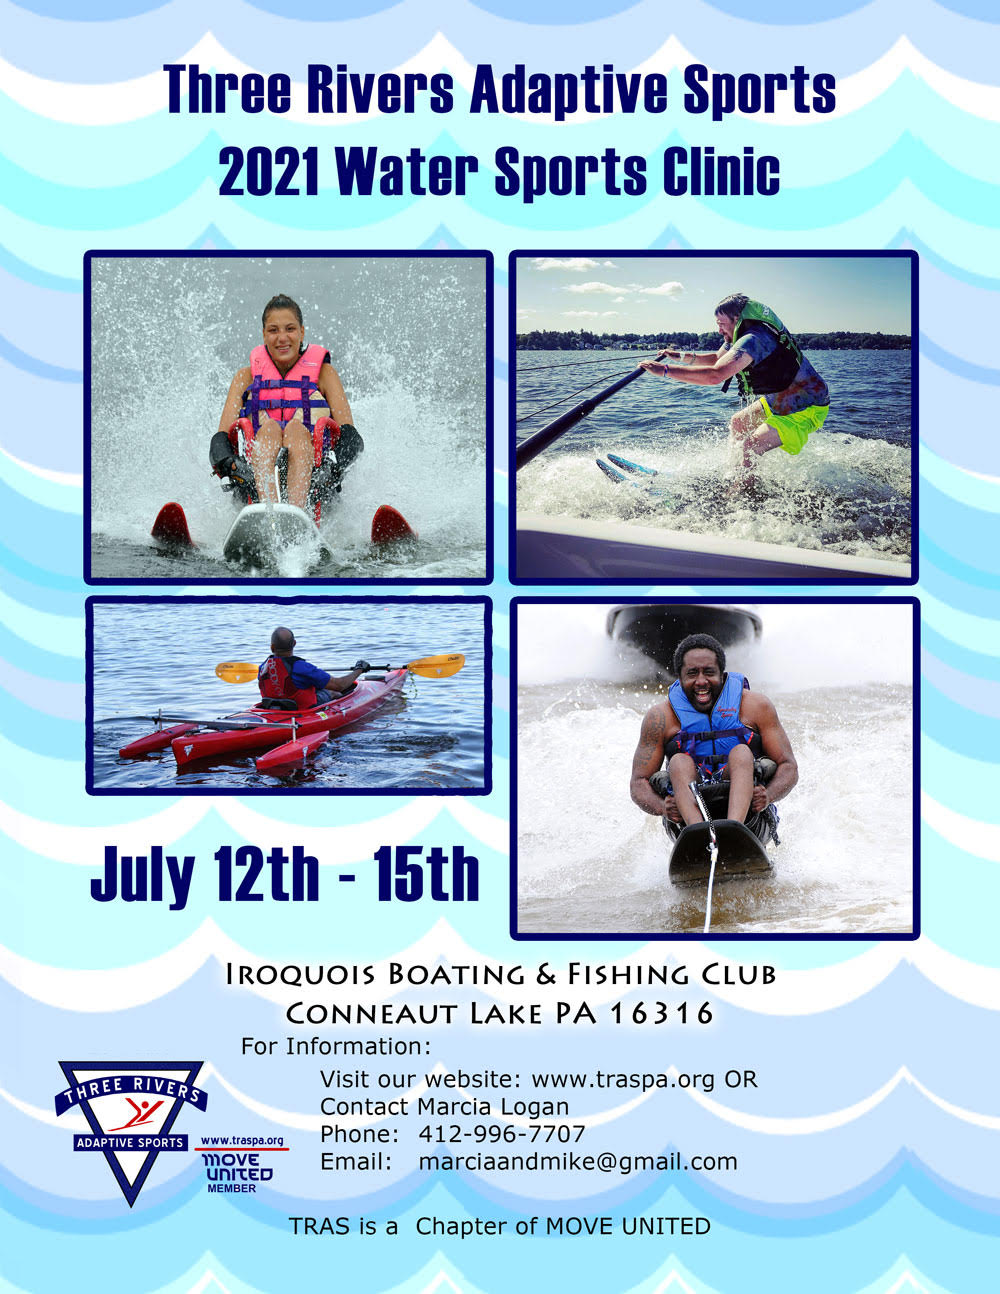 2021 TRAS WATER SPORTS CLINIC